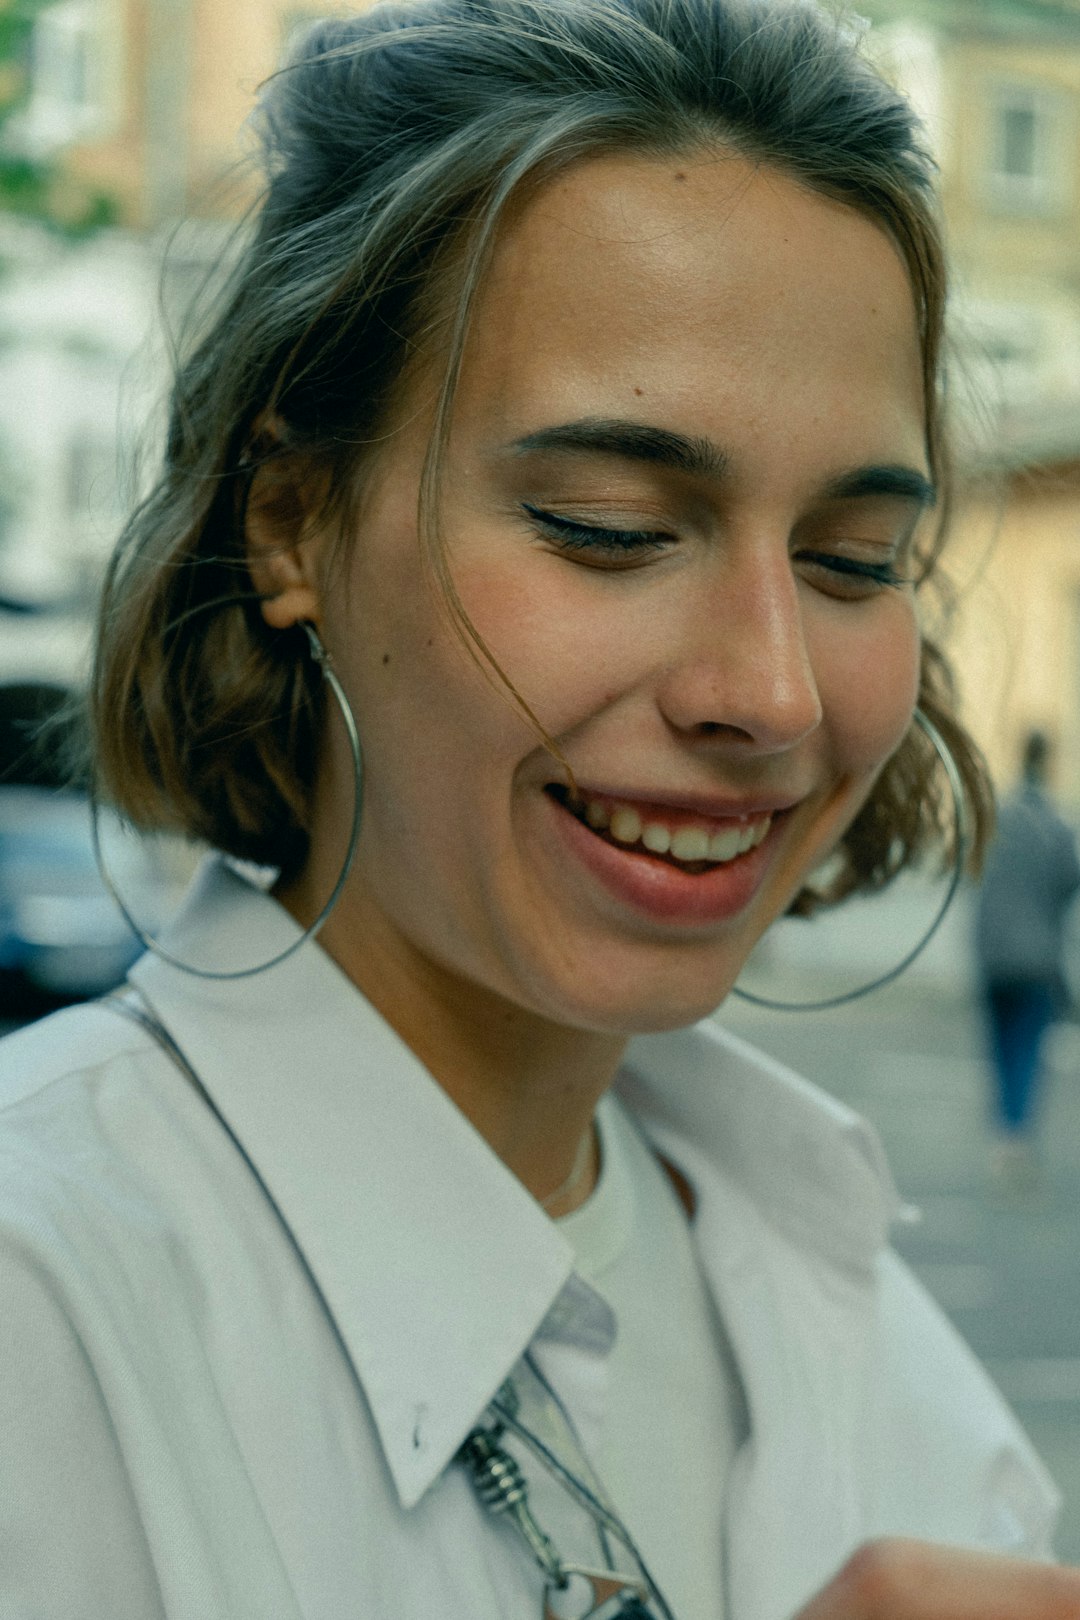 woman in white collared shirt smiling